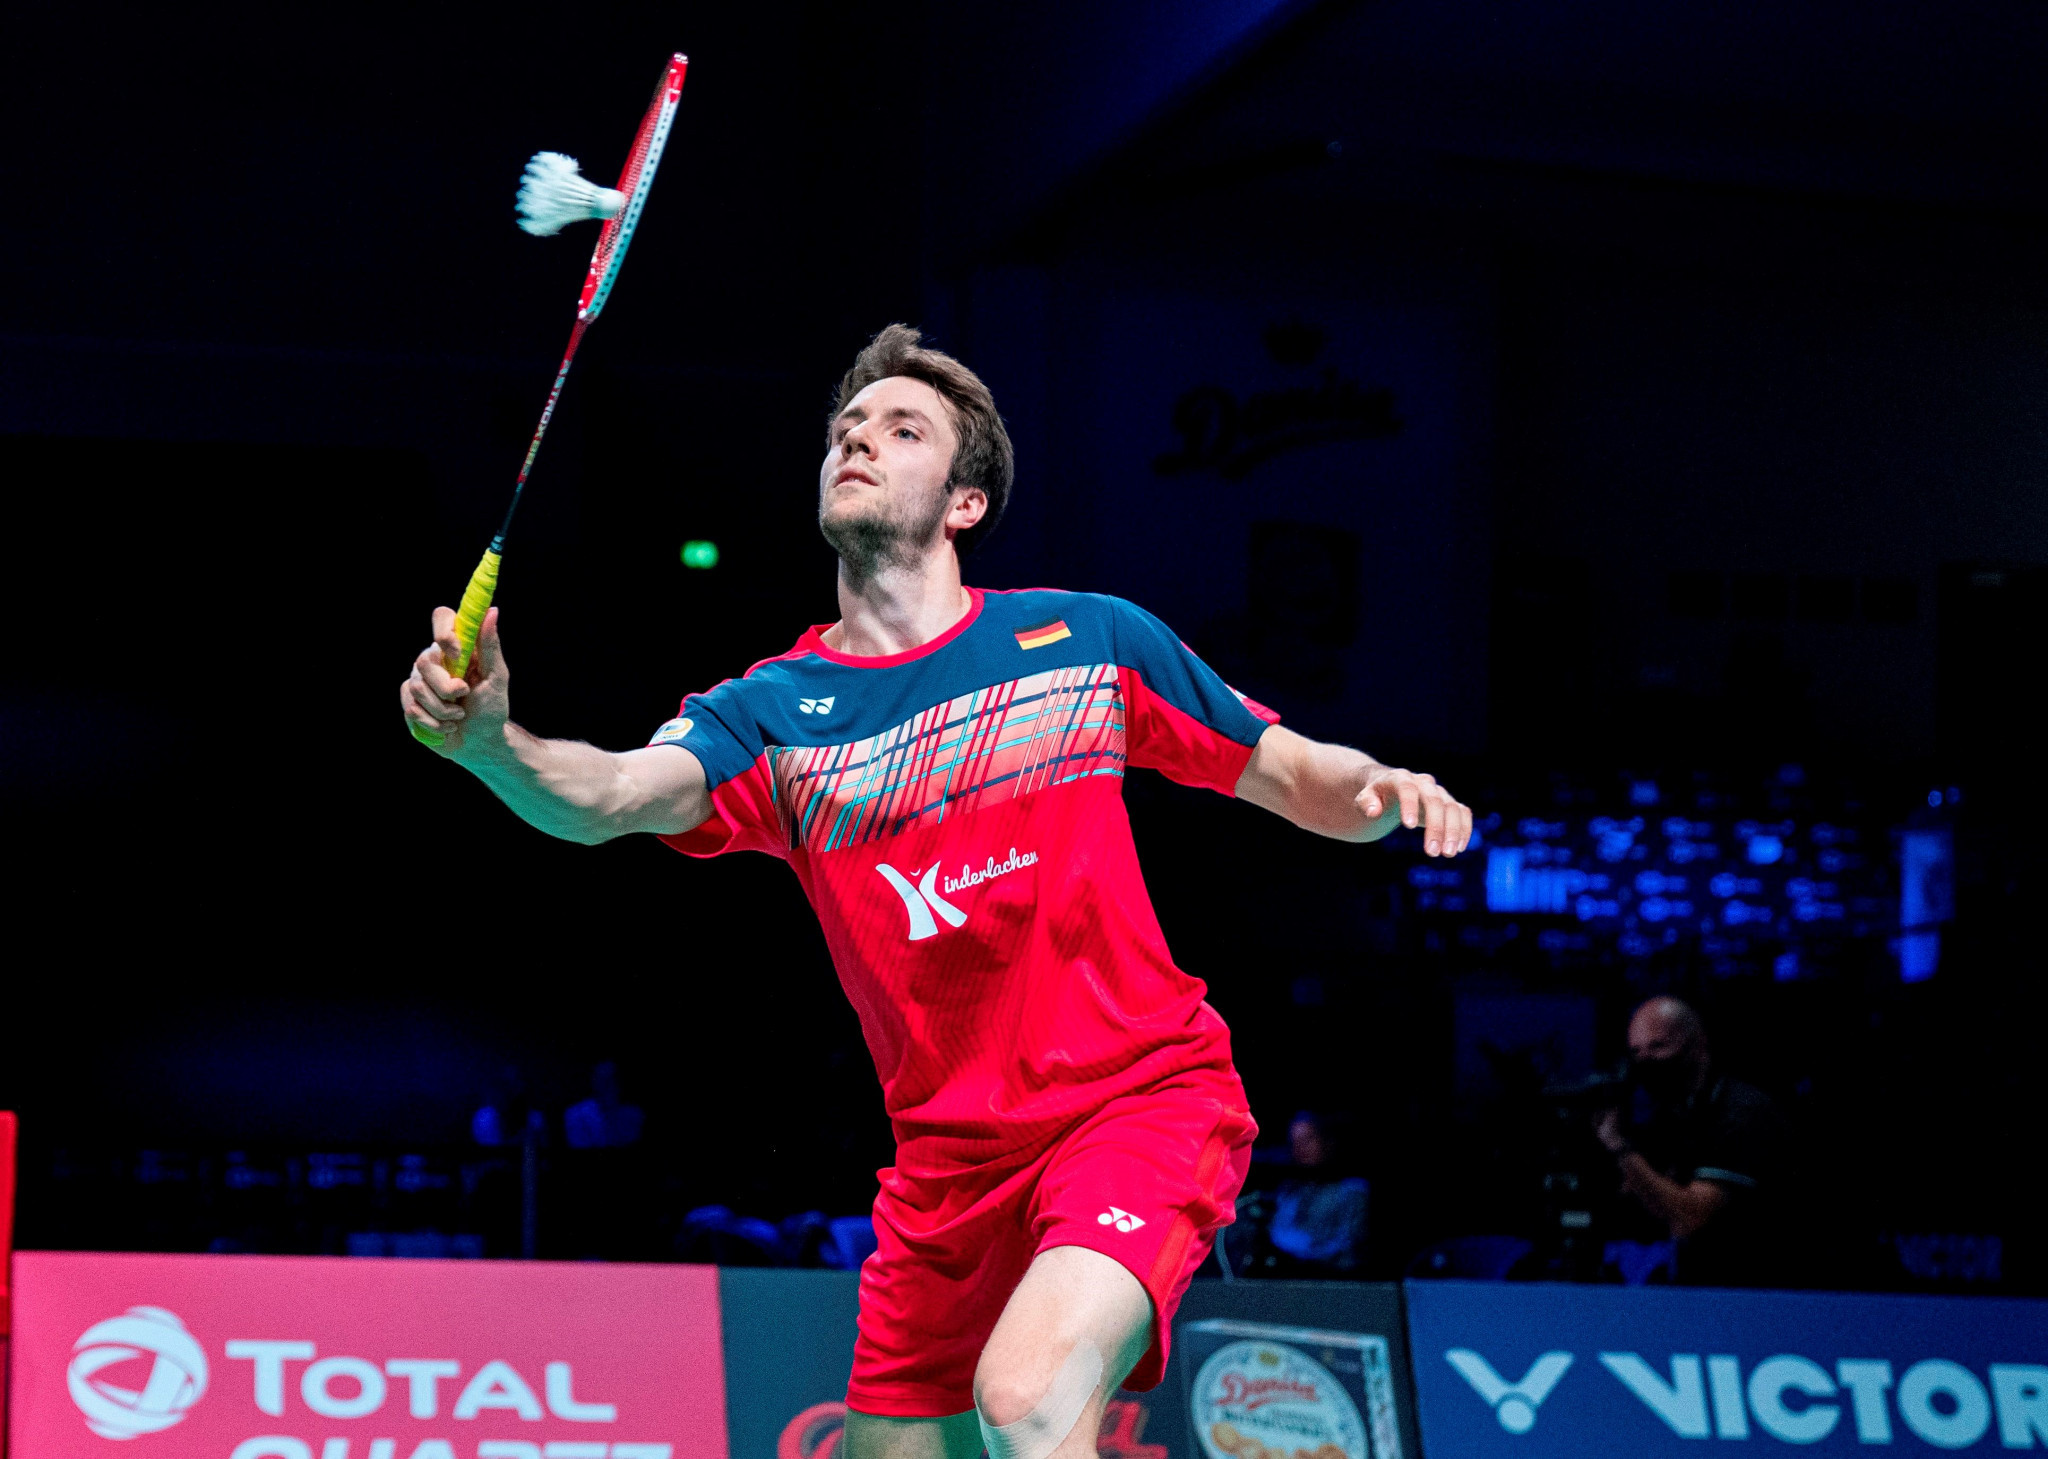 Mark Lamsfuss, pictured, is through to round two of the European Badminton Championships along with men's doubles partner Marvin Seidel ©Getty Images